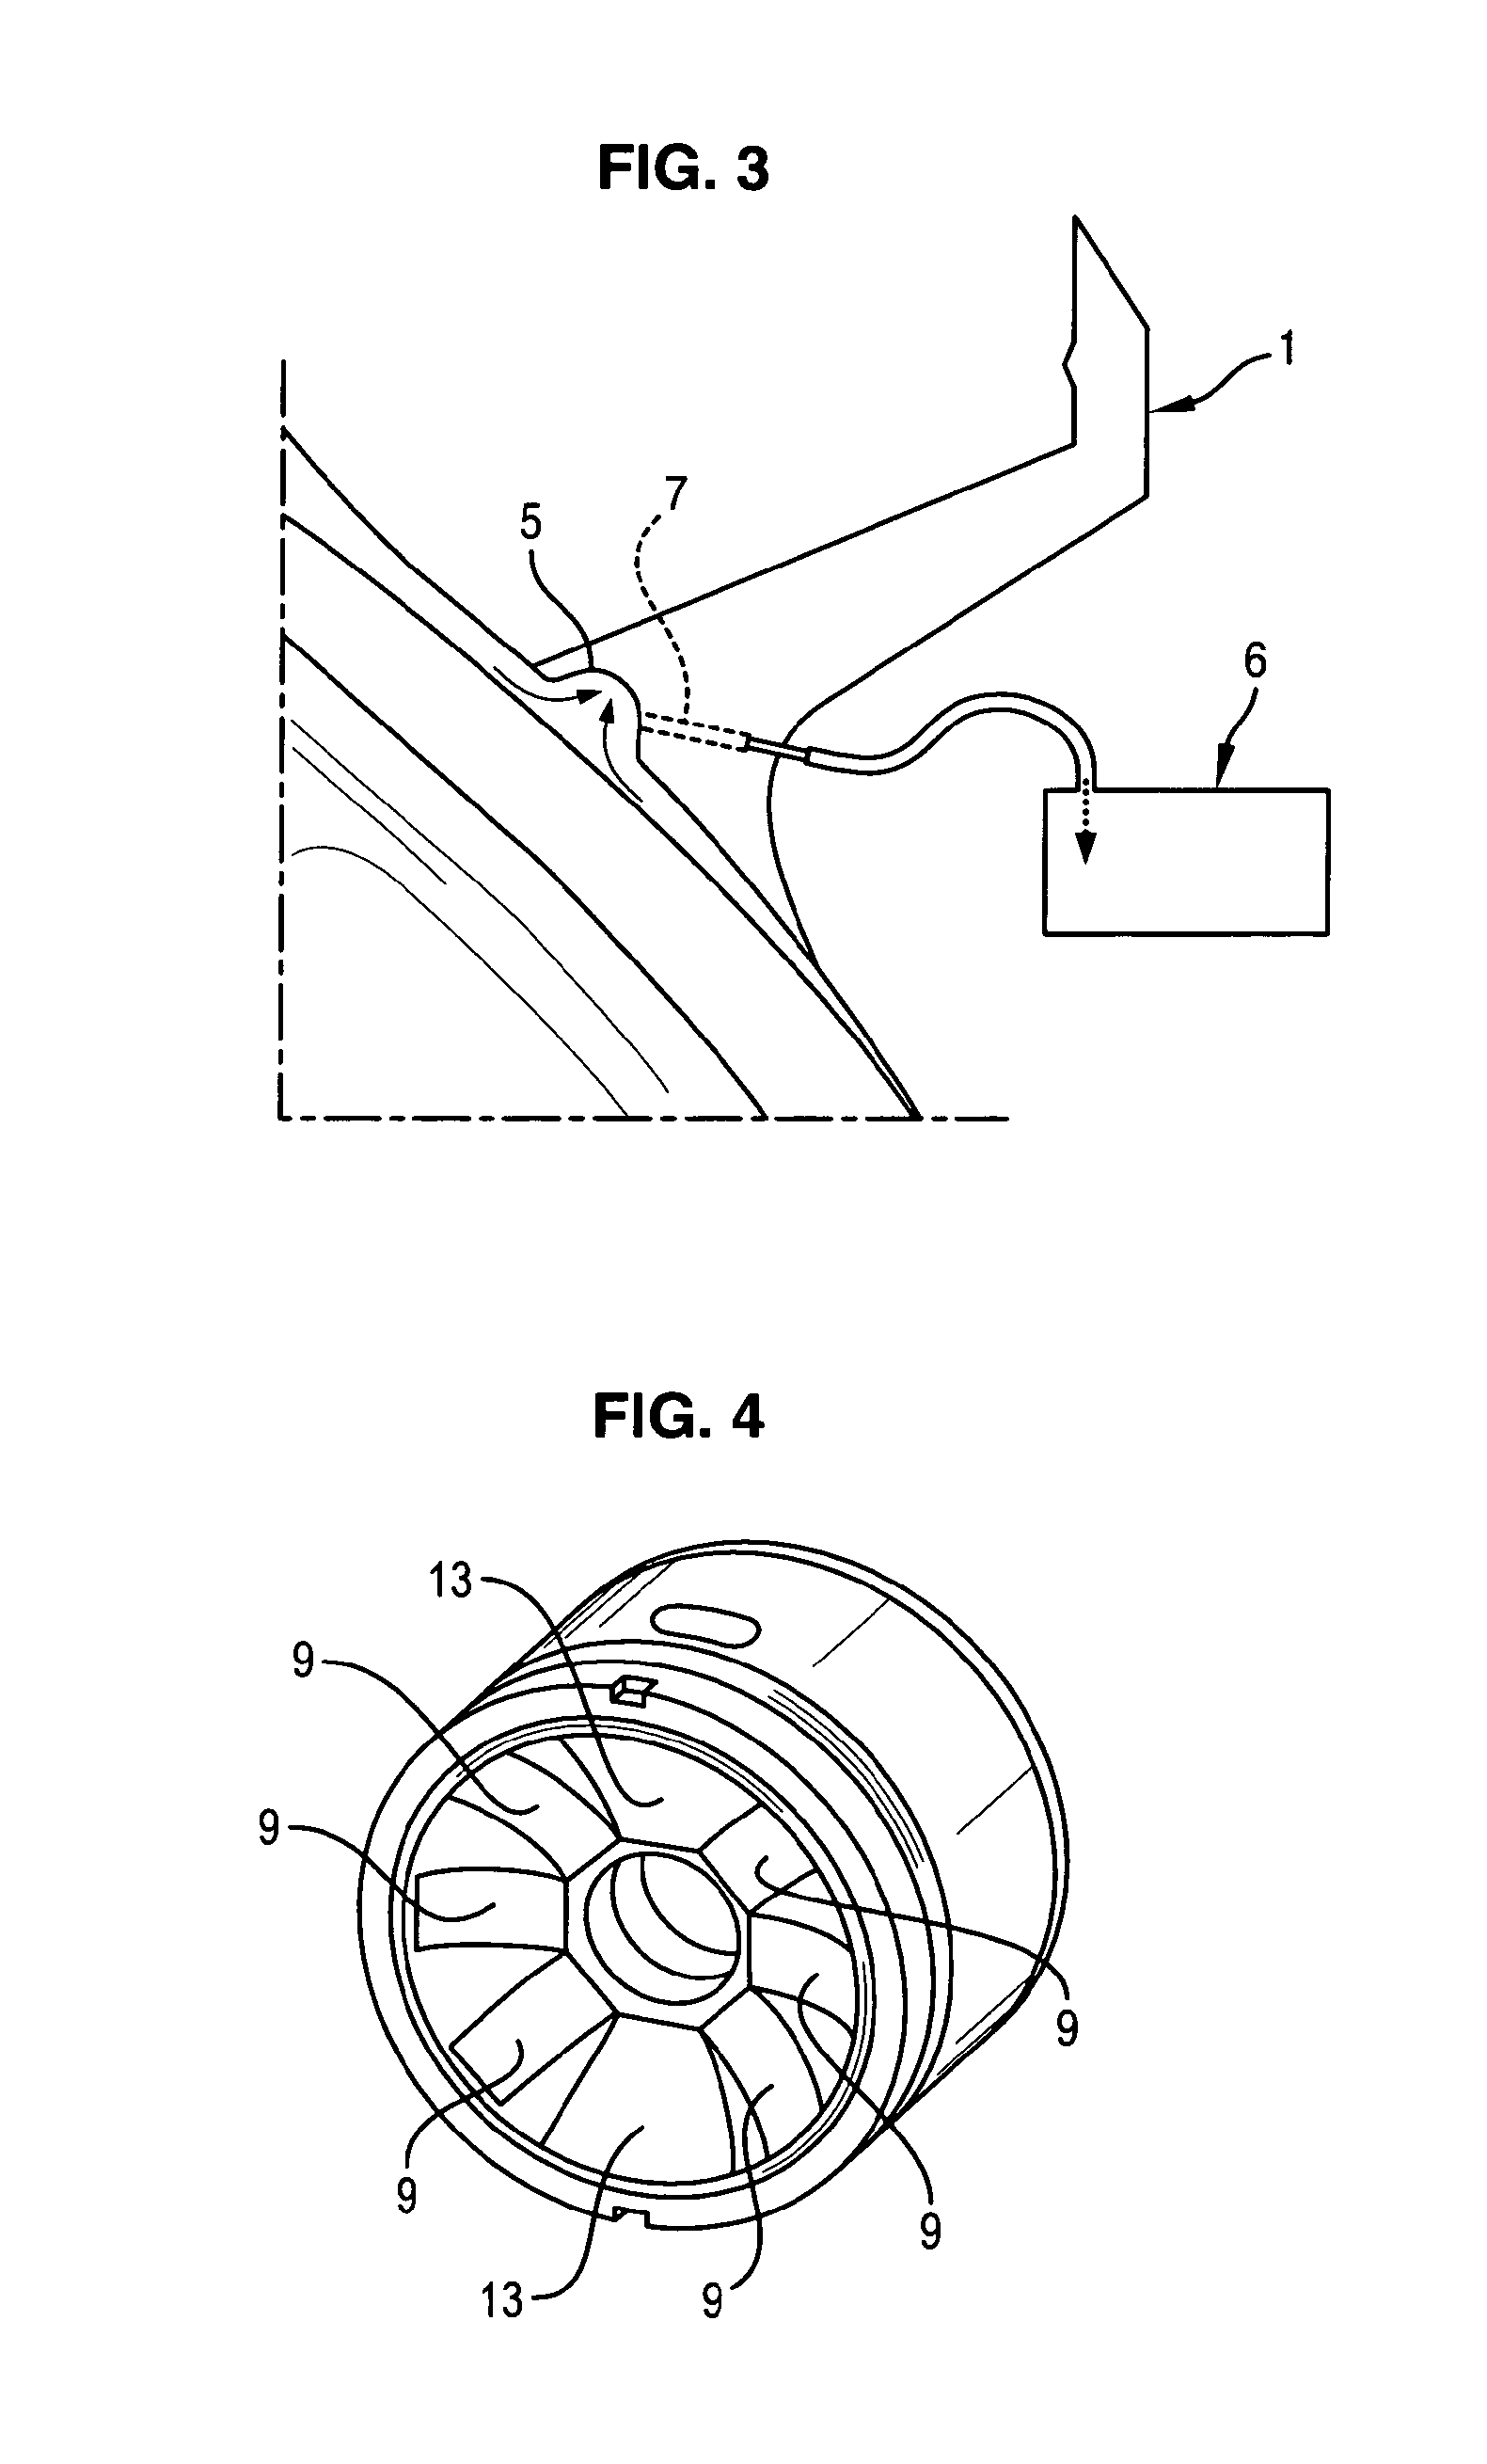 High intensity focused ultrasound device with a concave segment shaped transducer for eye treatment